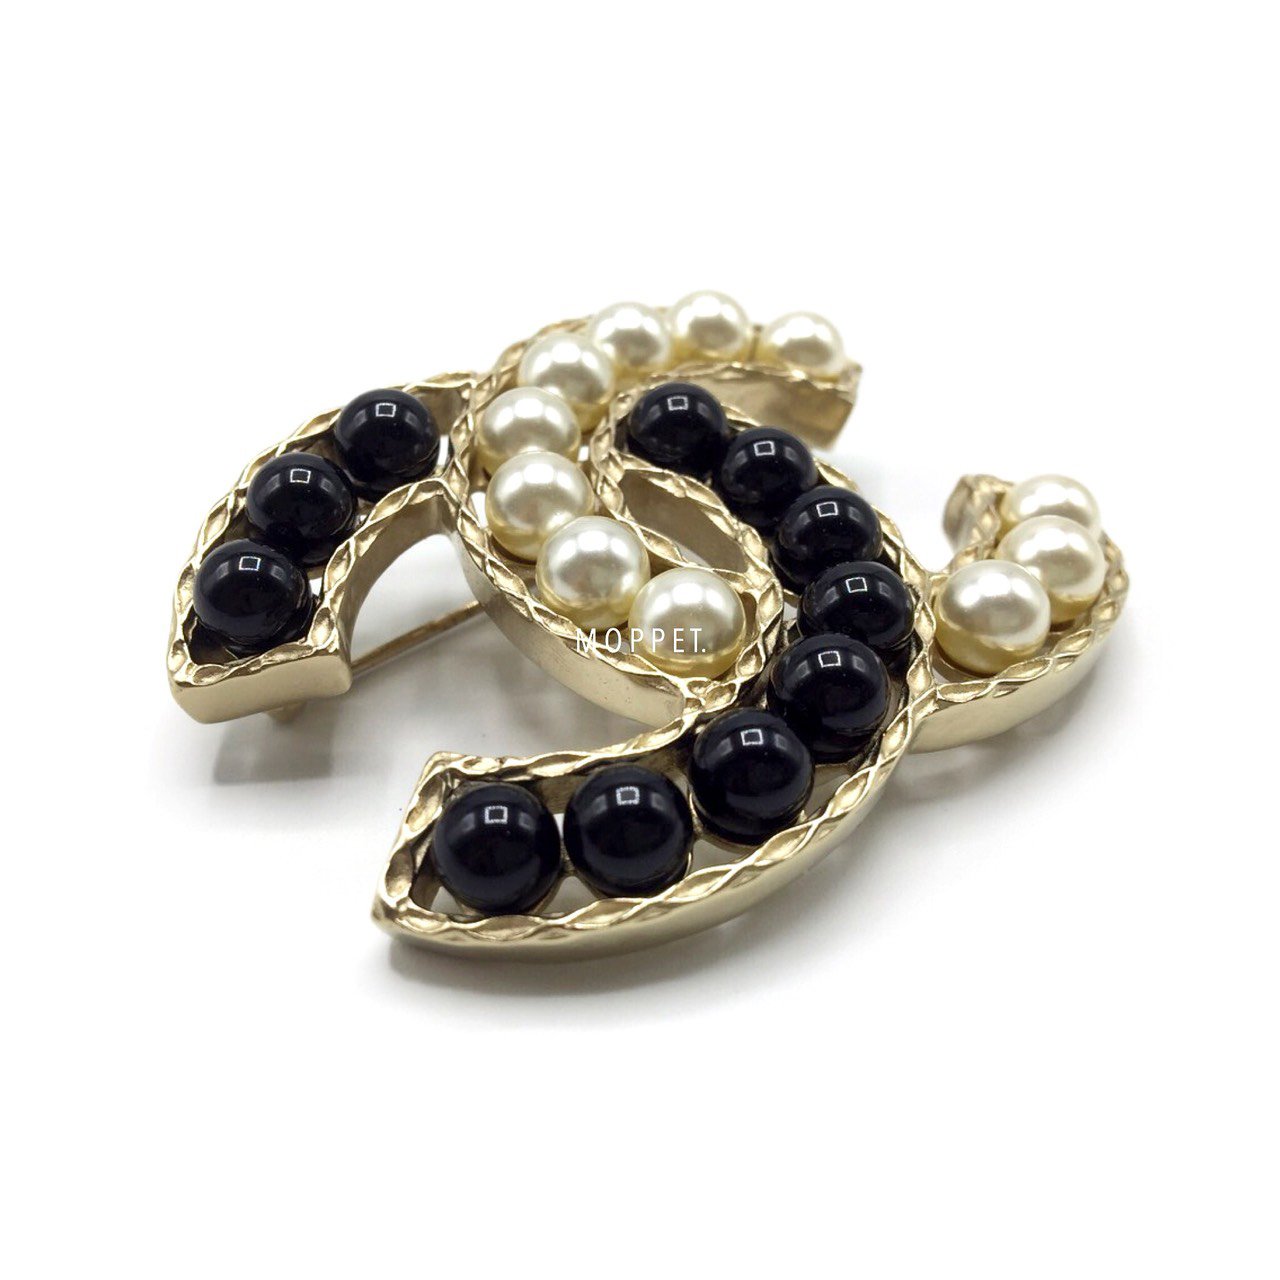 New Chanel CC Brooch 5.5 CM in Pearly/Black GHW